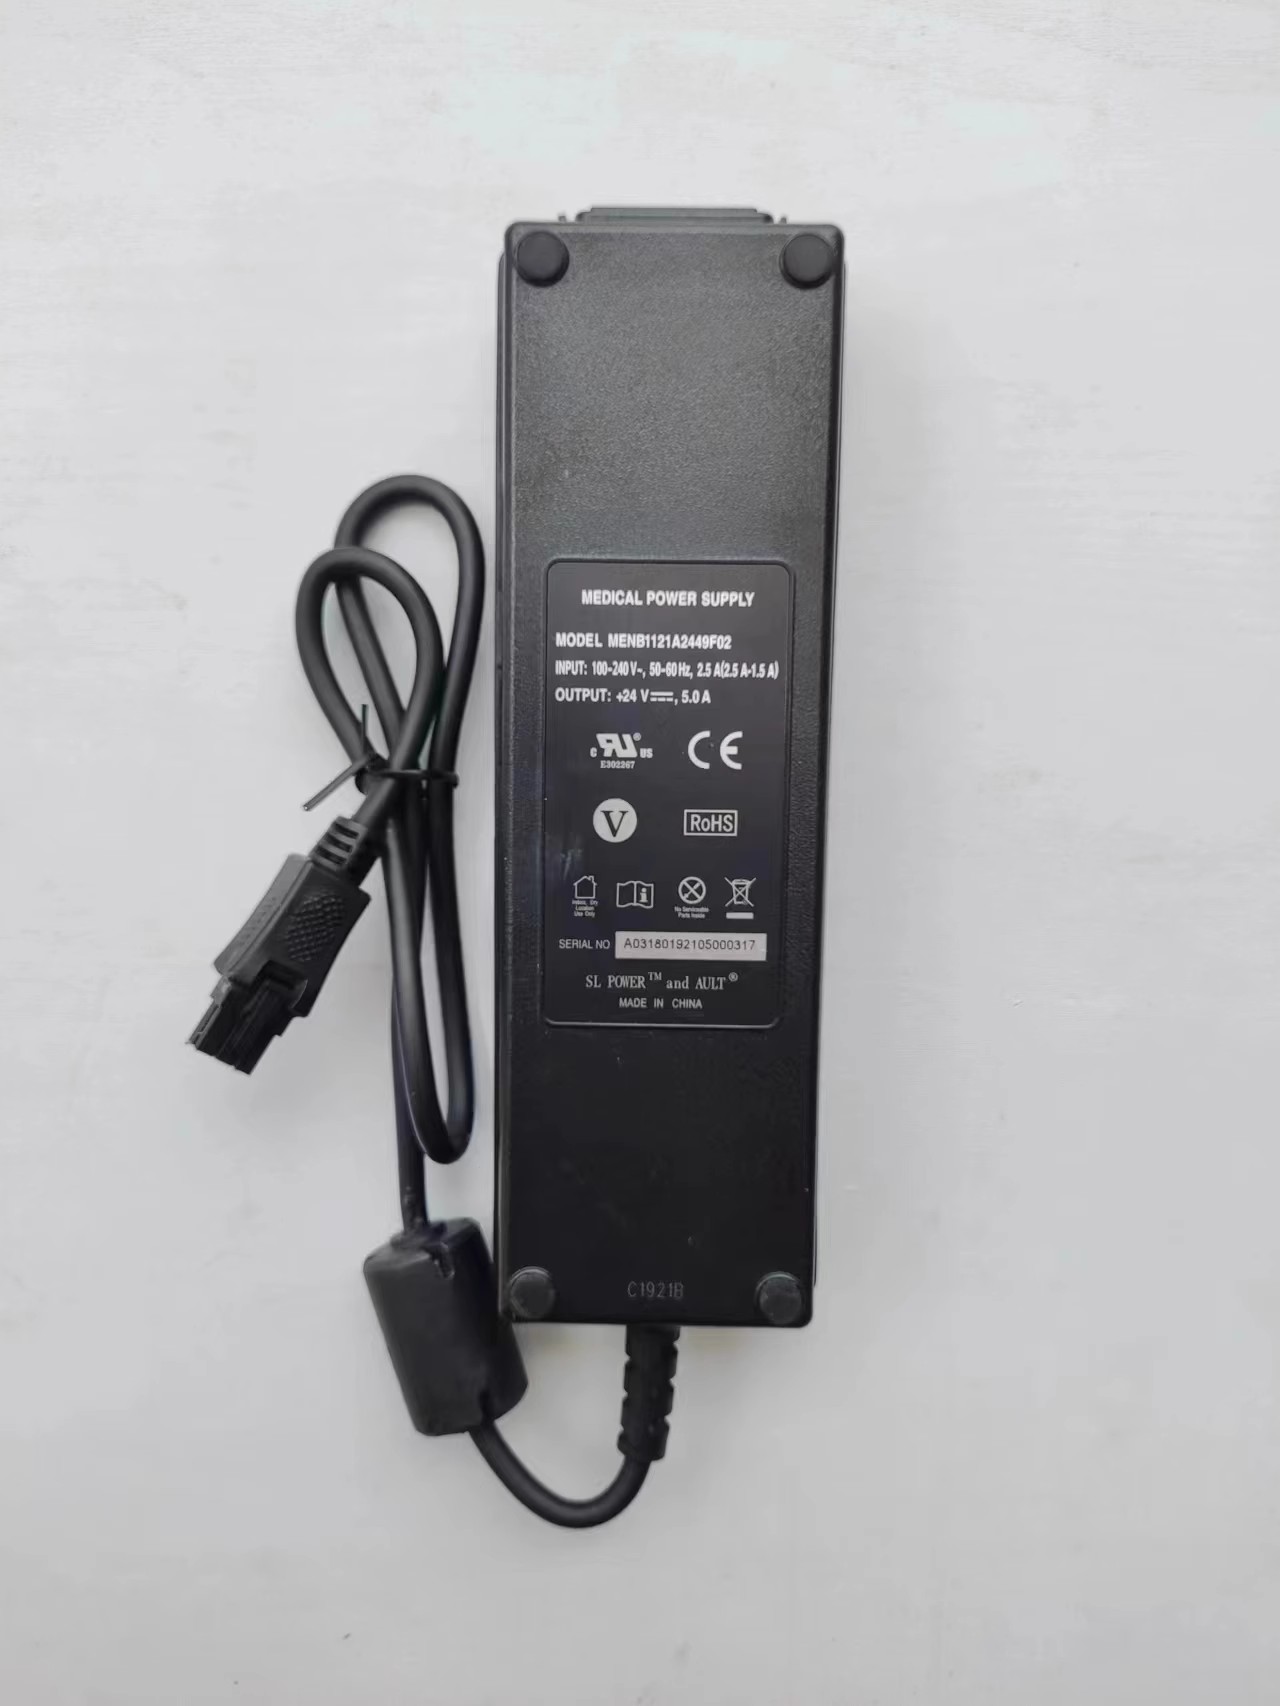 *Brand NEW*MEDICAL 24V 5.0A AC/DC AC ADAPTER MENB1121A2449F02 POWER Supply